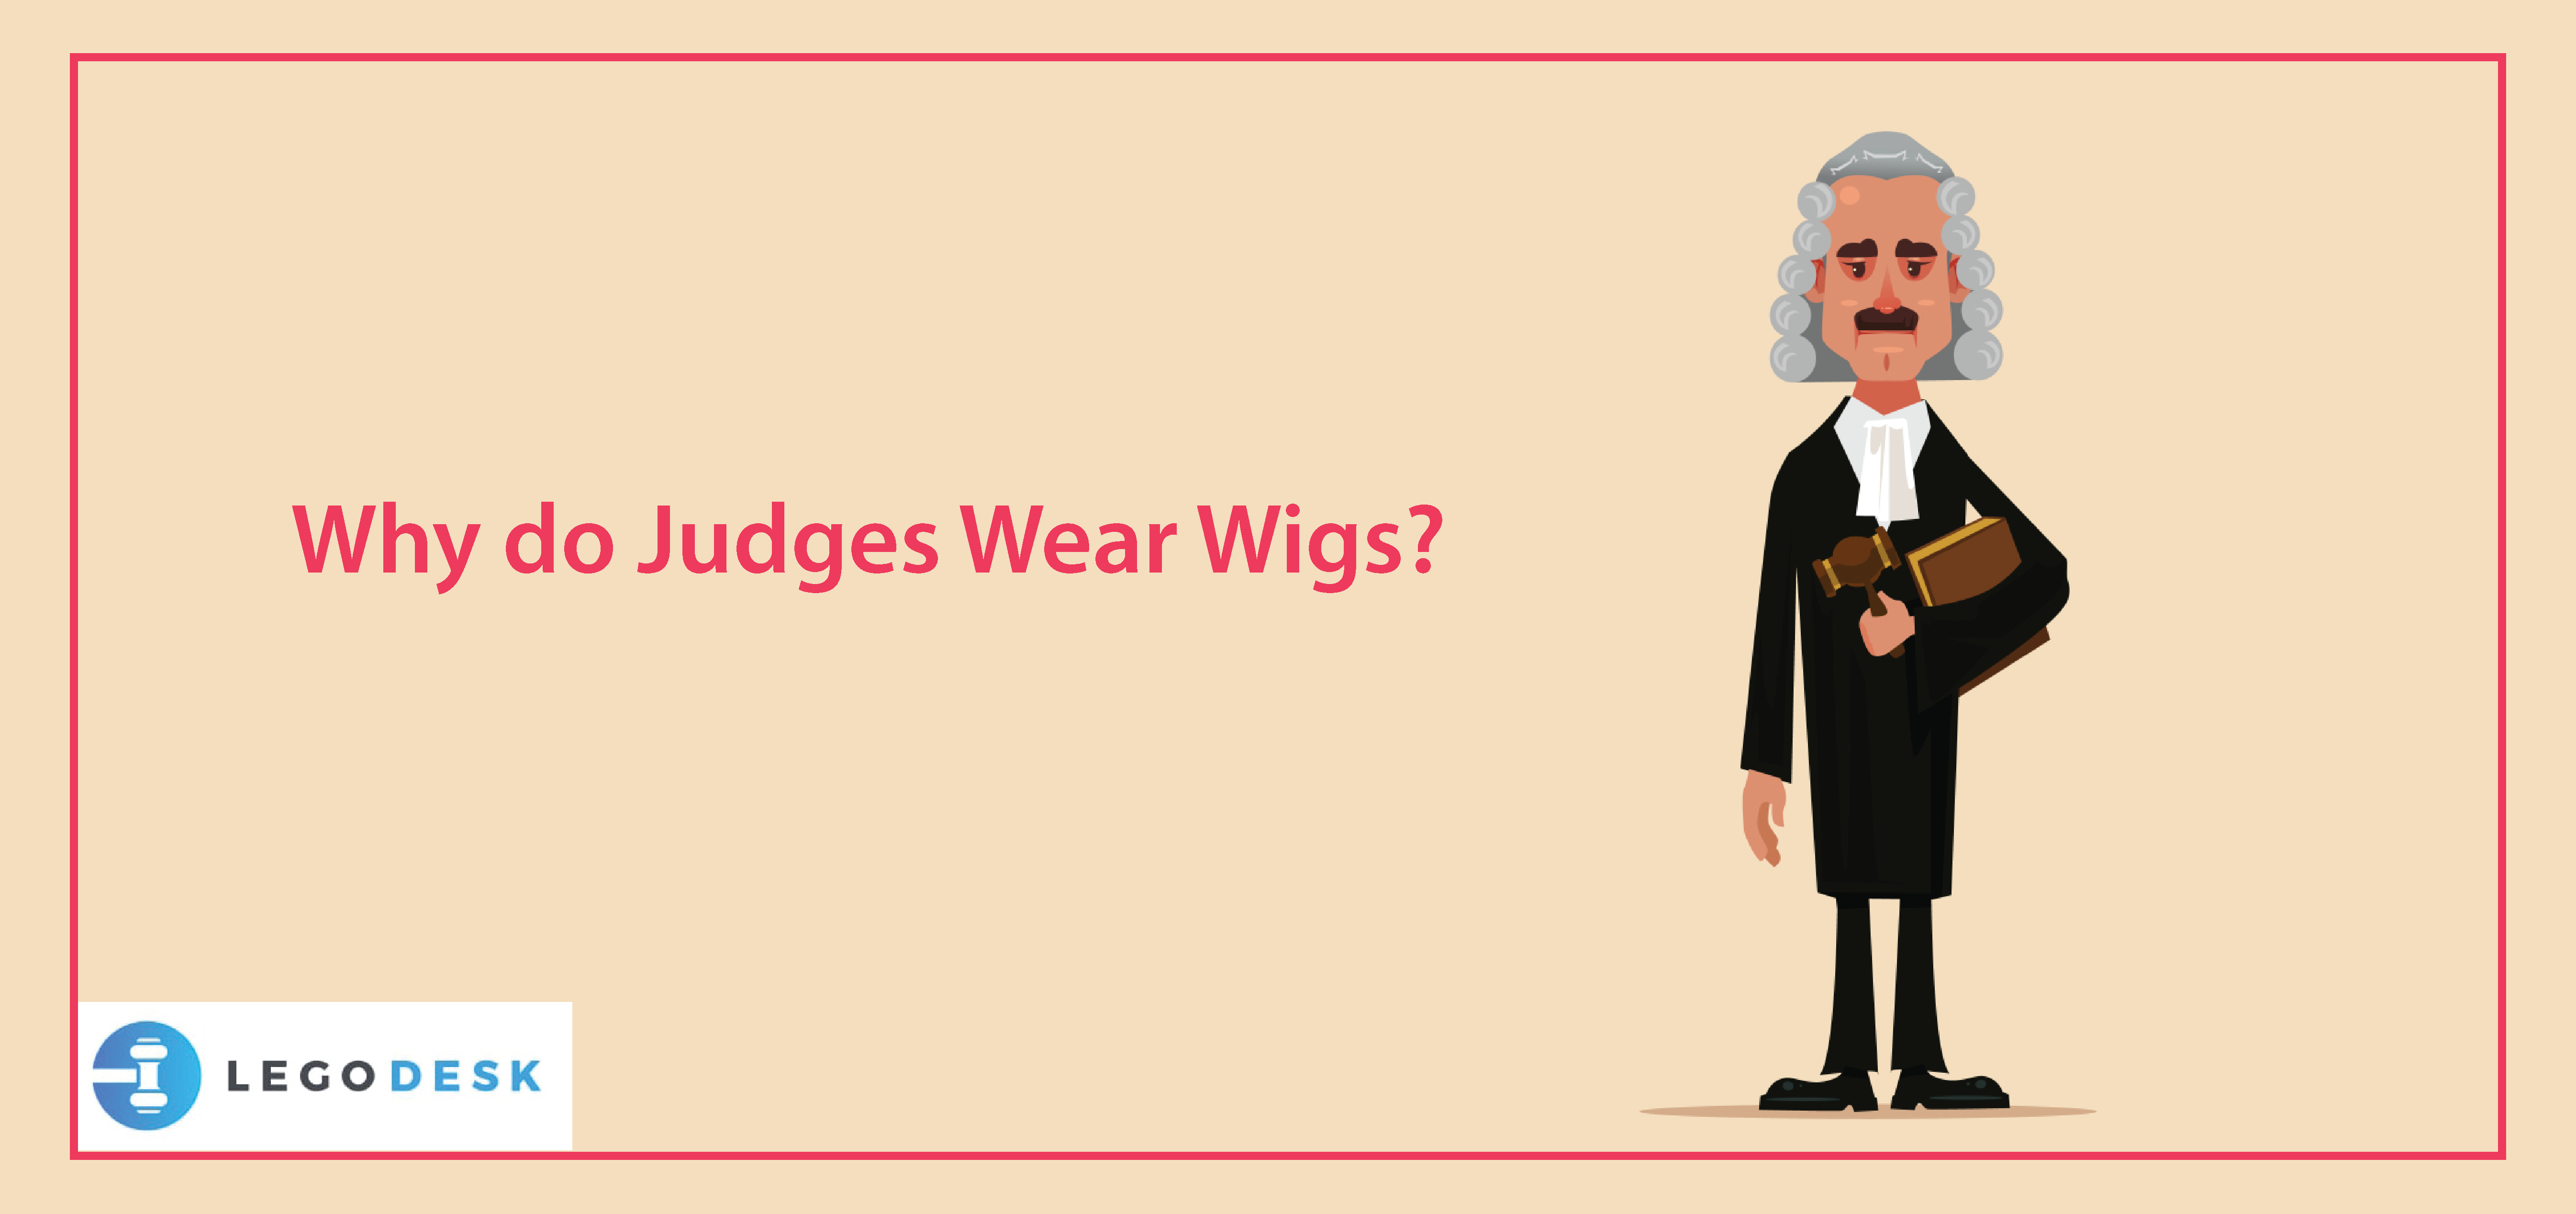 Why do Judges Wear Wigs